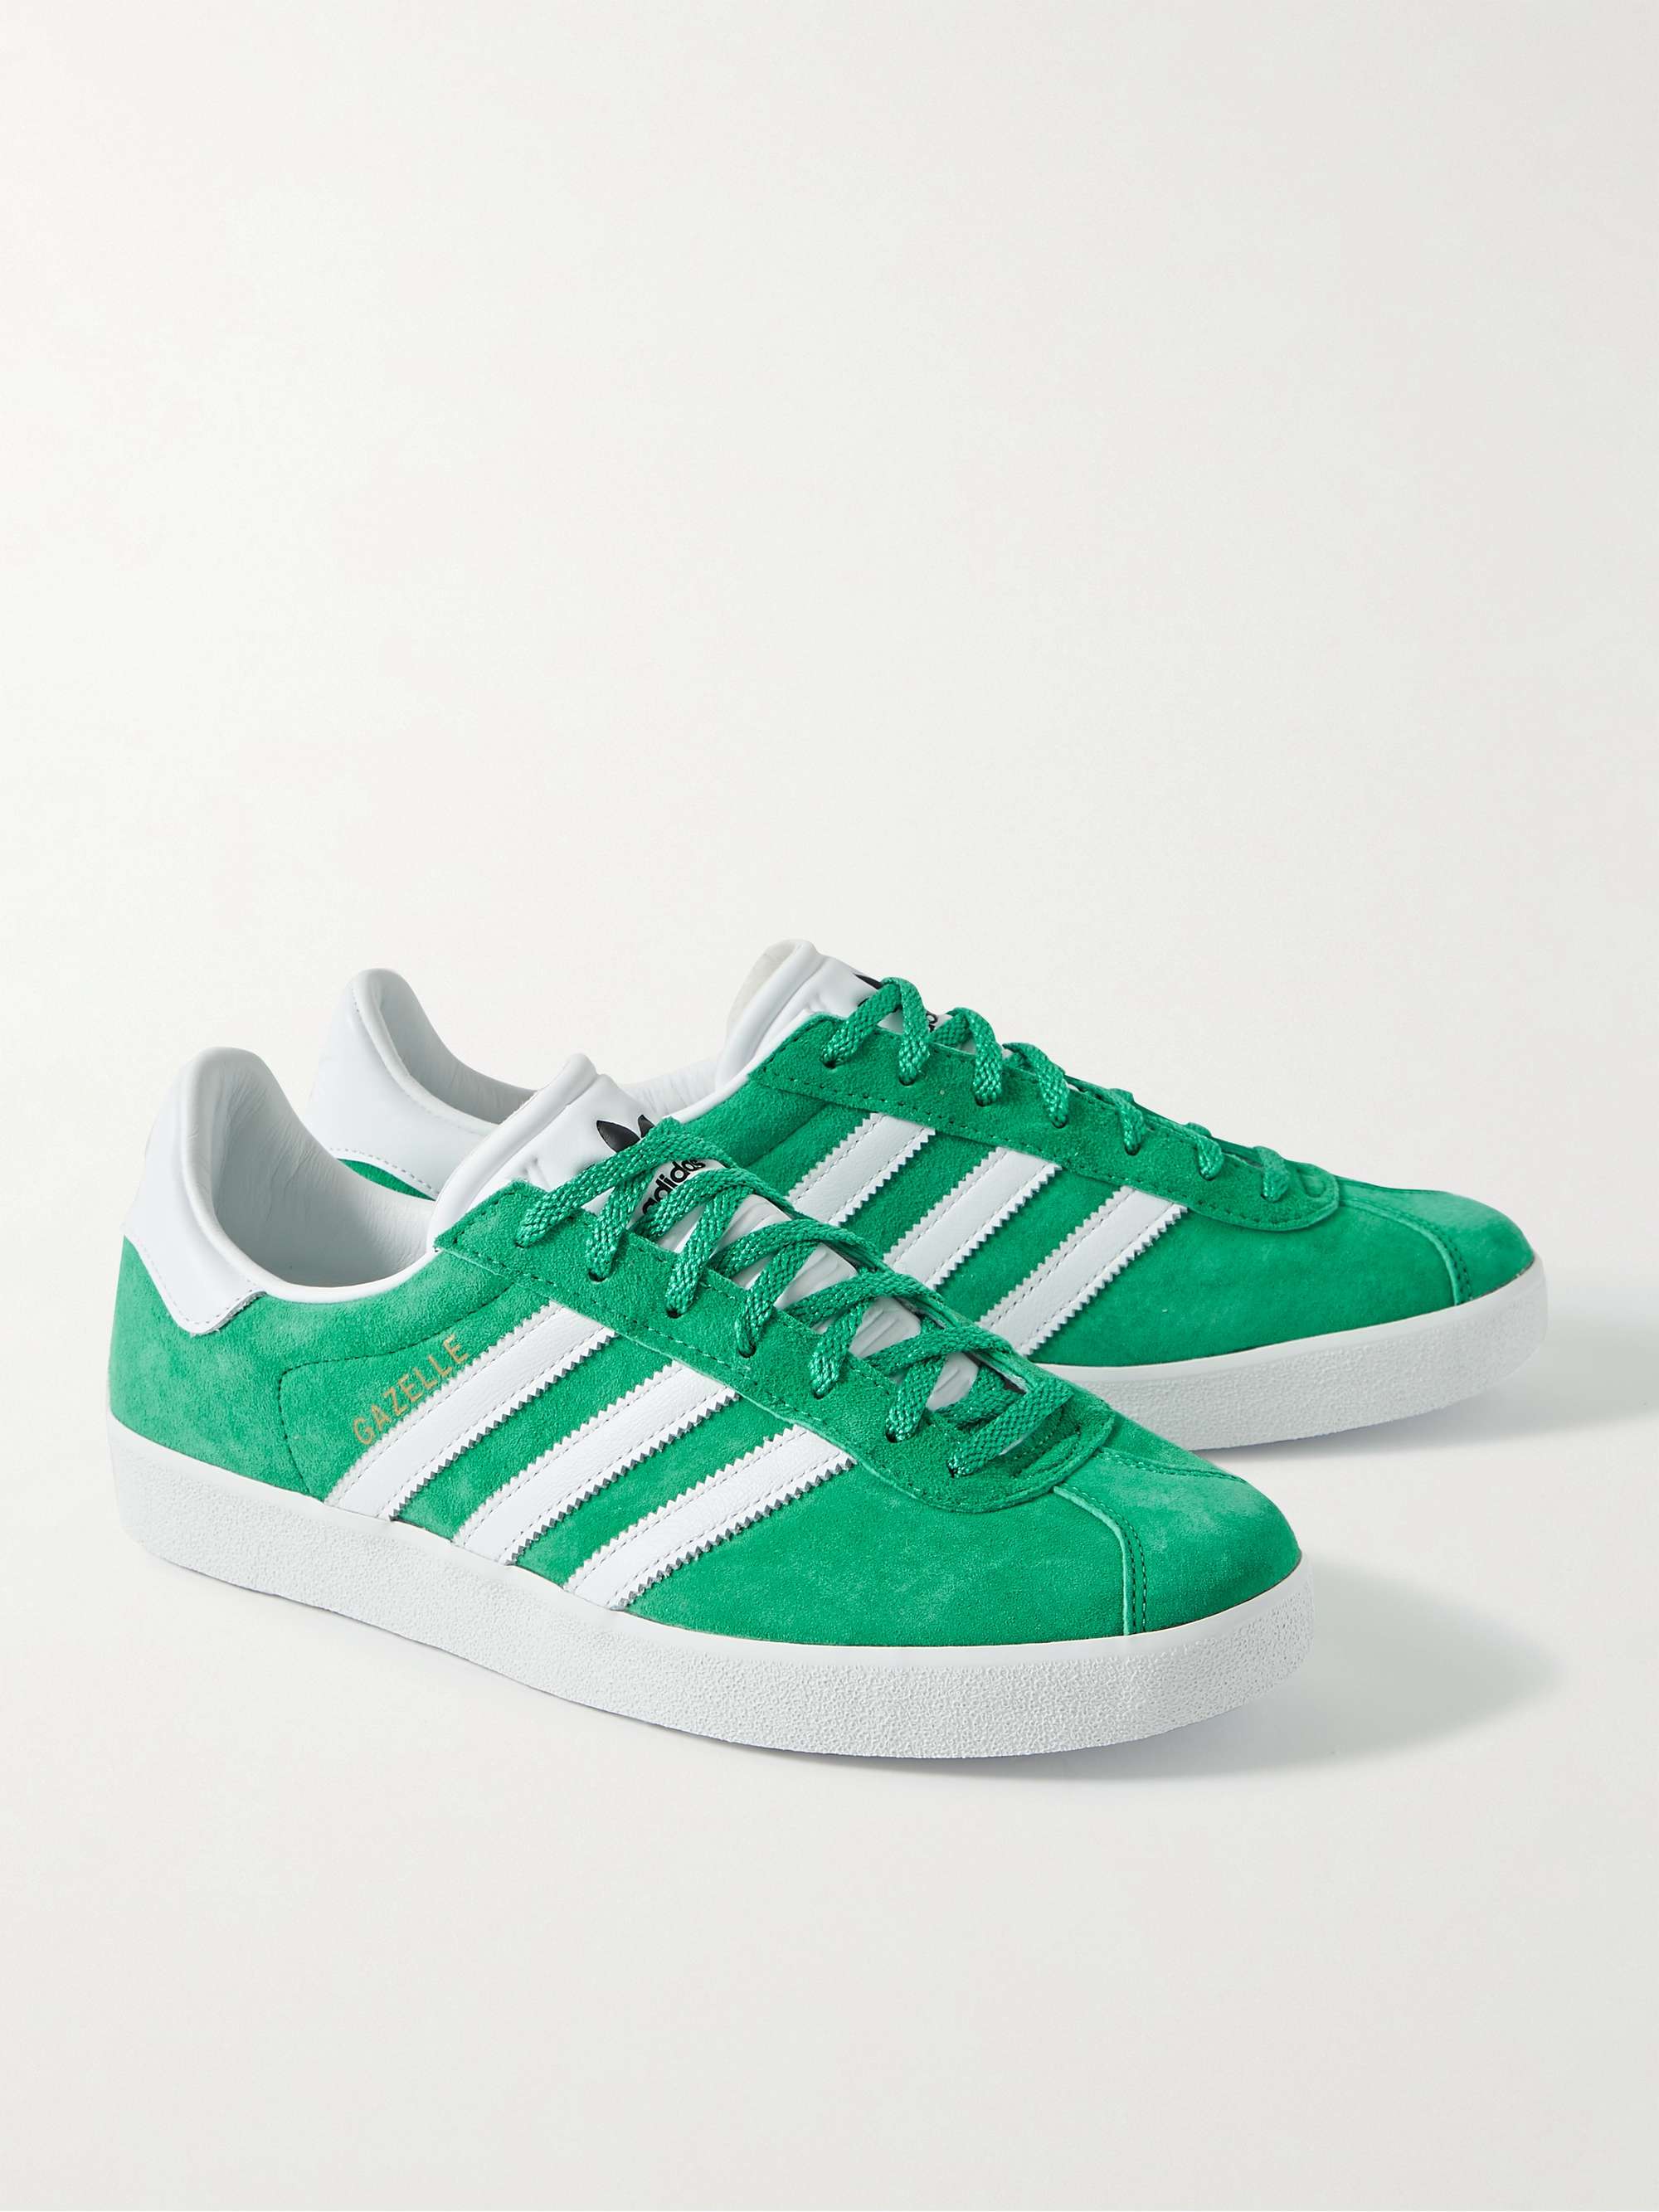 ADIDAS ORIGINALS Gazelle 85 Leather-Trimmed Suede Sneakers